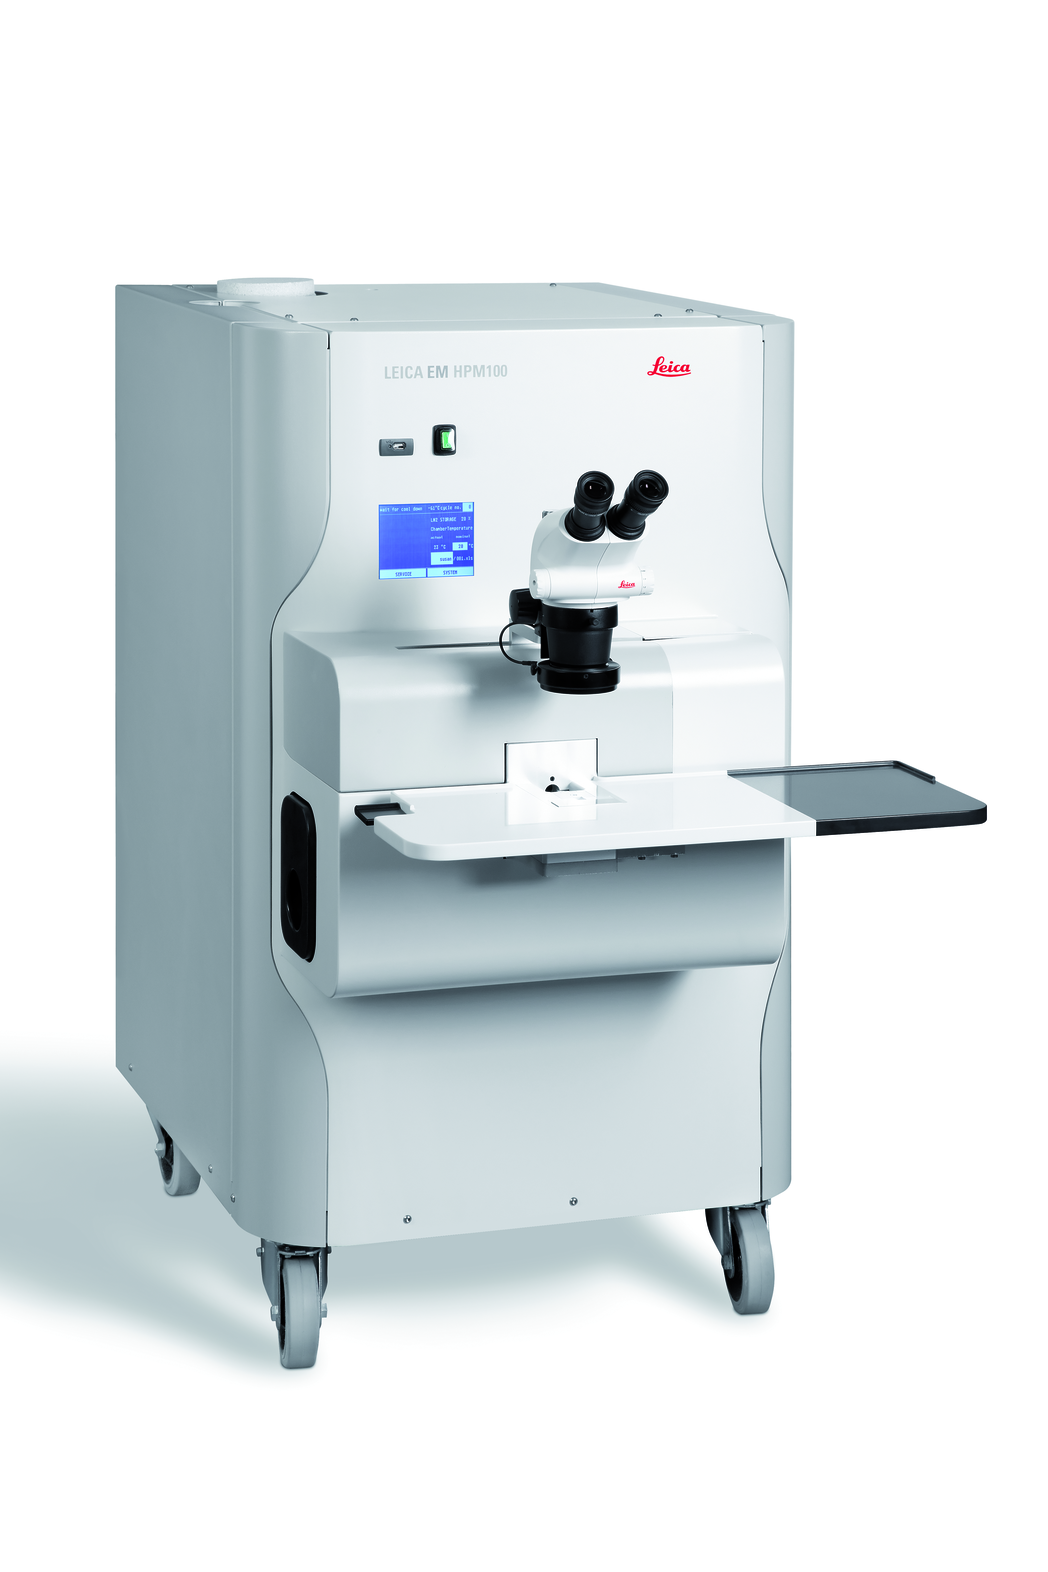 The Leica EM HPM100 high pressure freezer for cryofixation of biological and industrial samples.